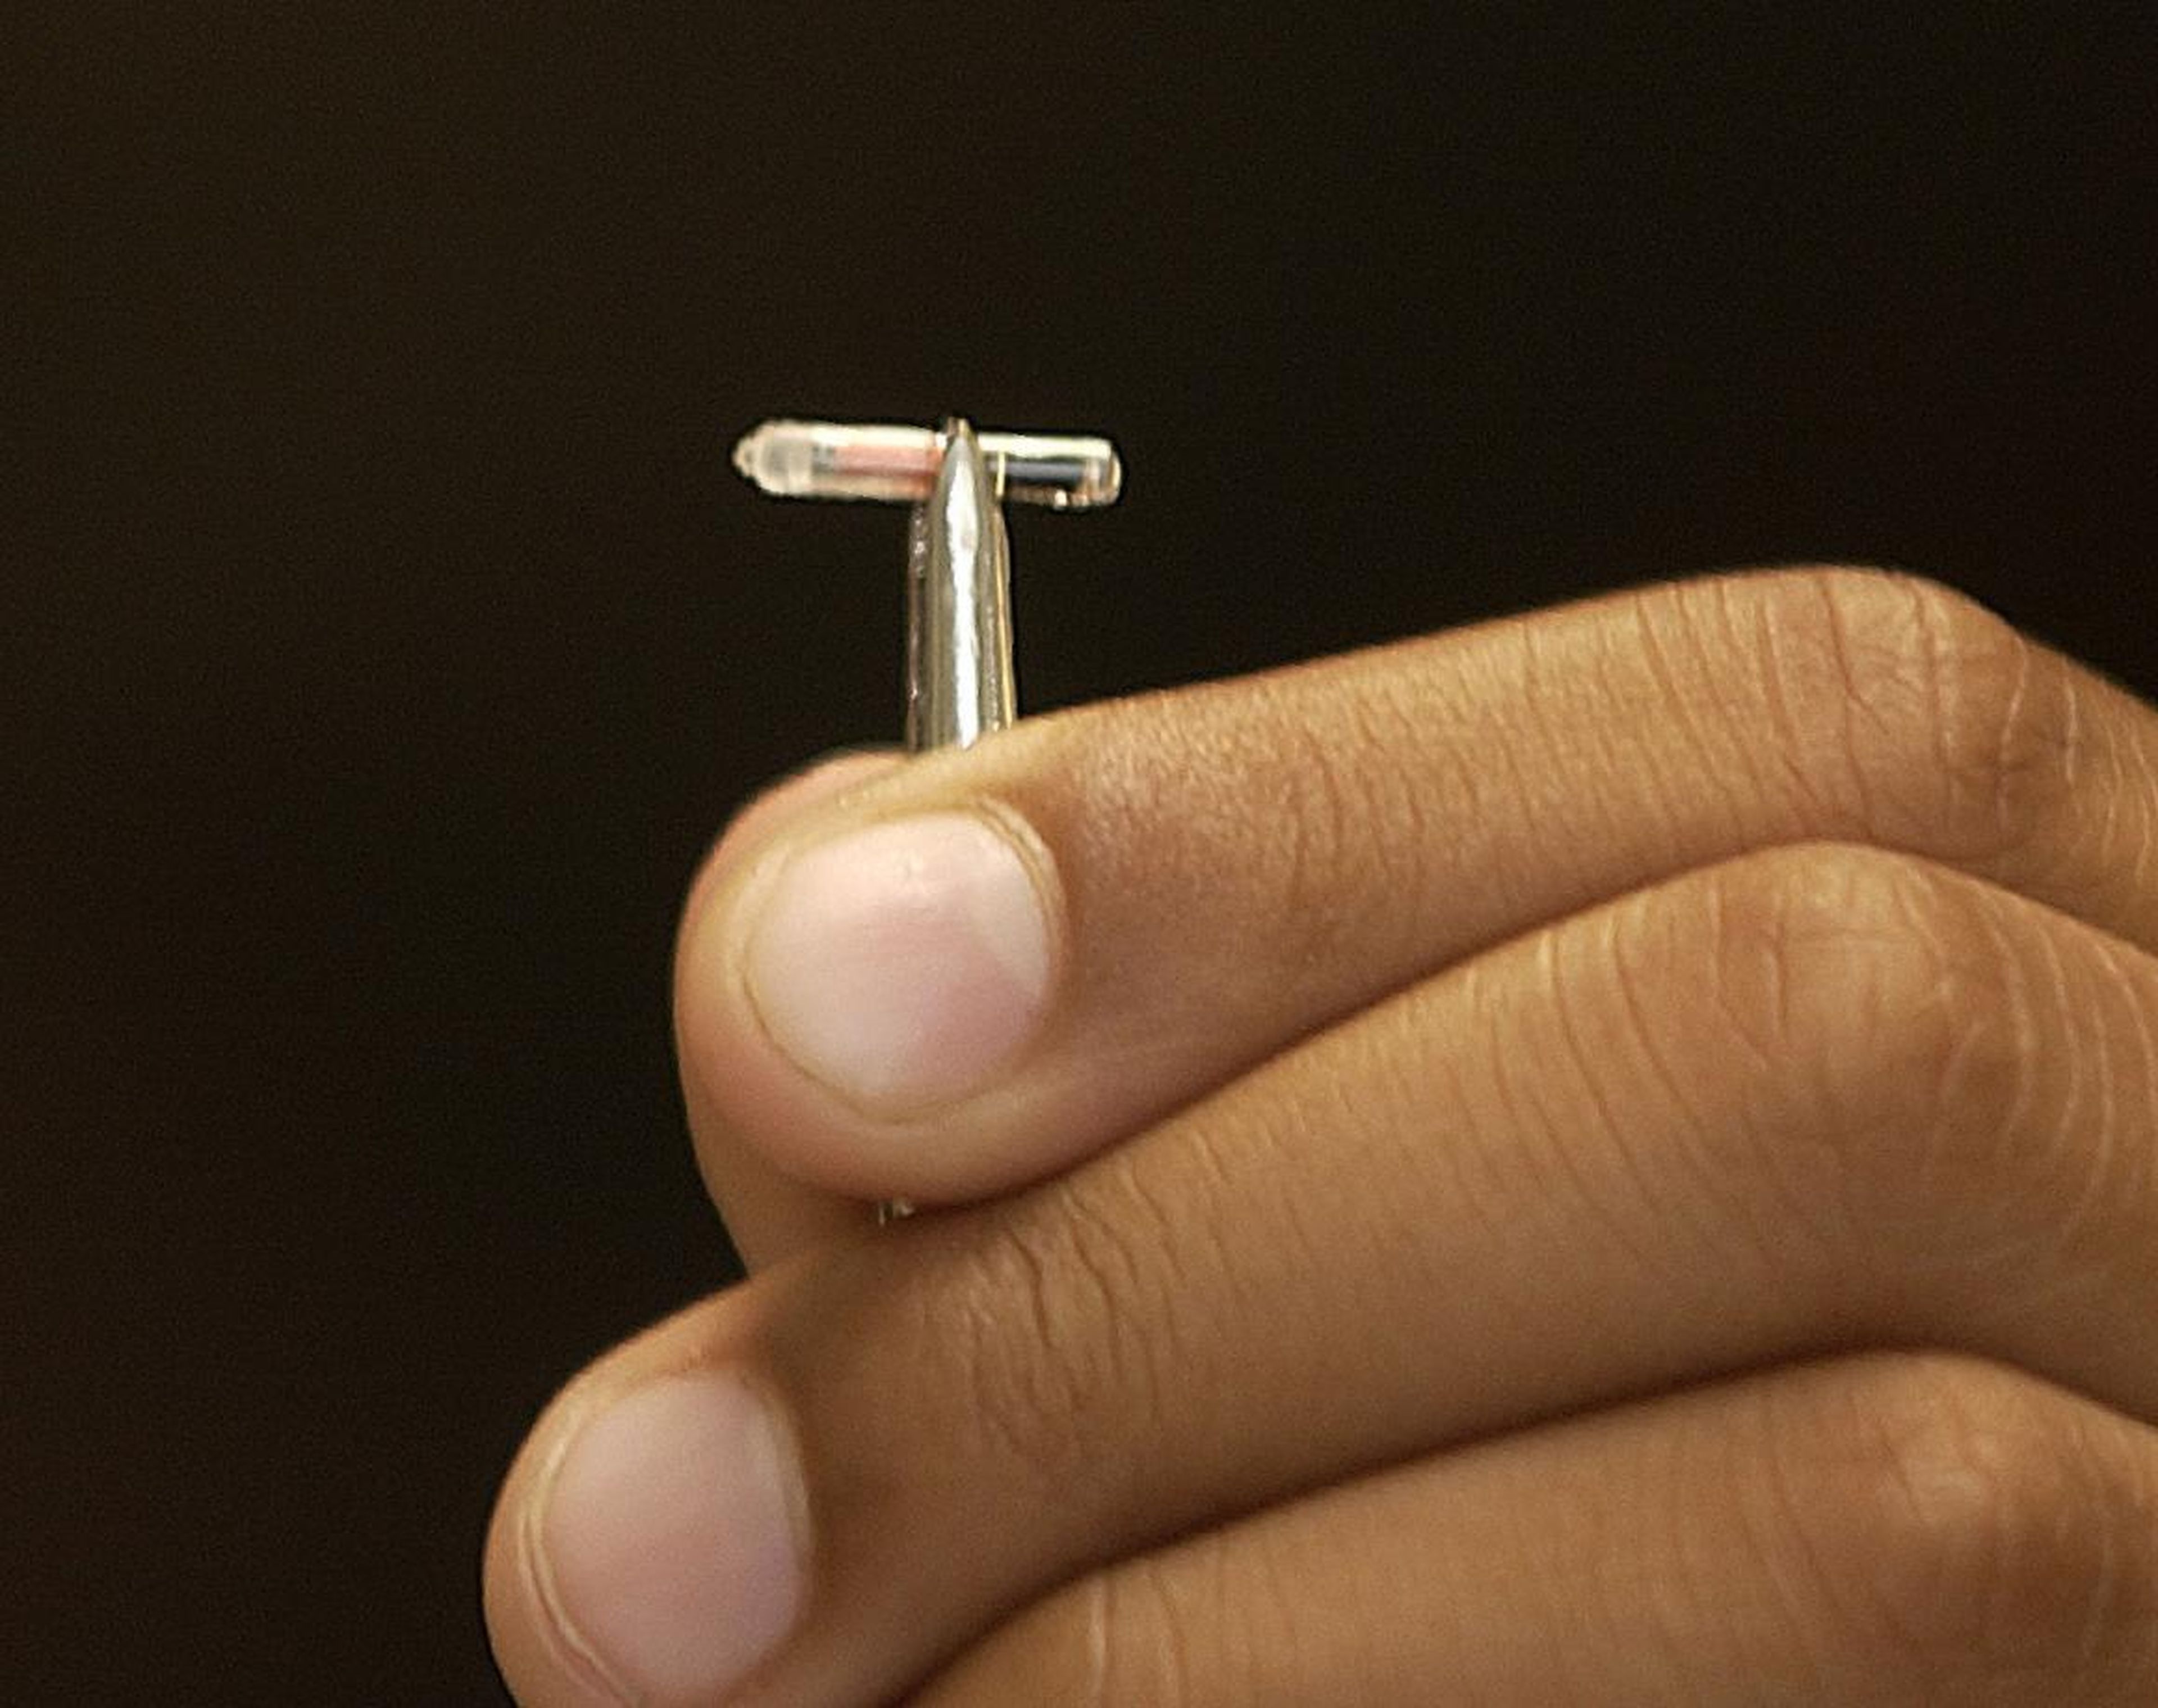 Several UK businesses are discussing implanting microchips in their employees' hands